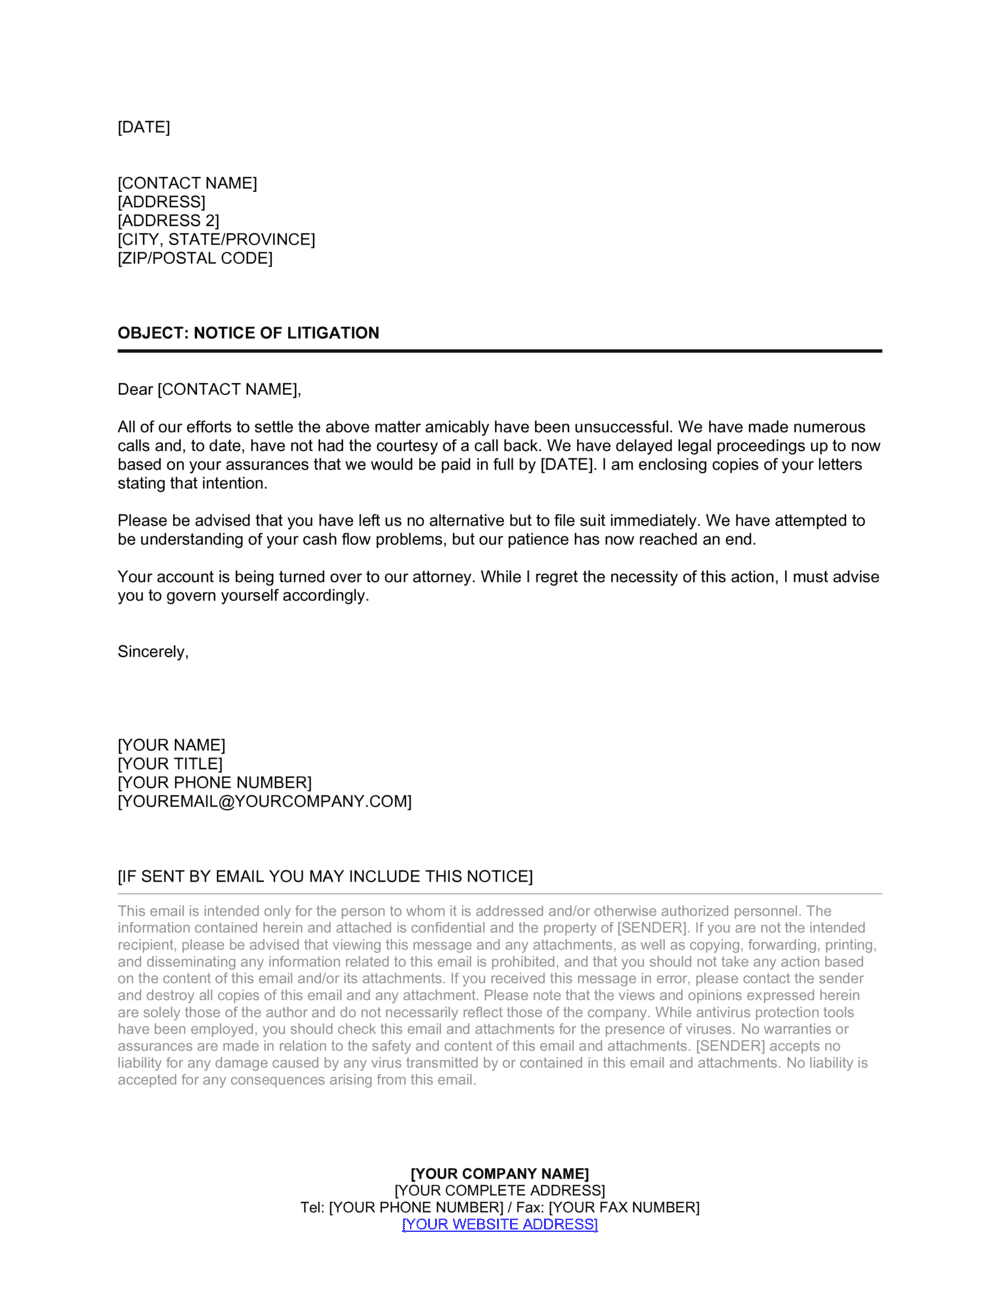 Letter Notice of Litigation Template  by Business-in-a-Box™